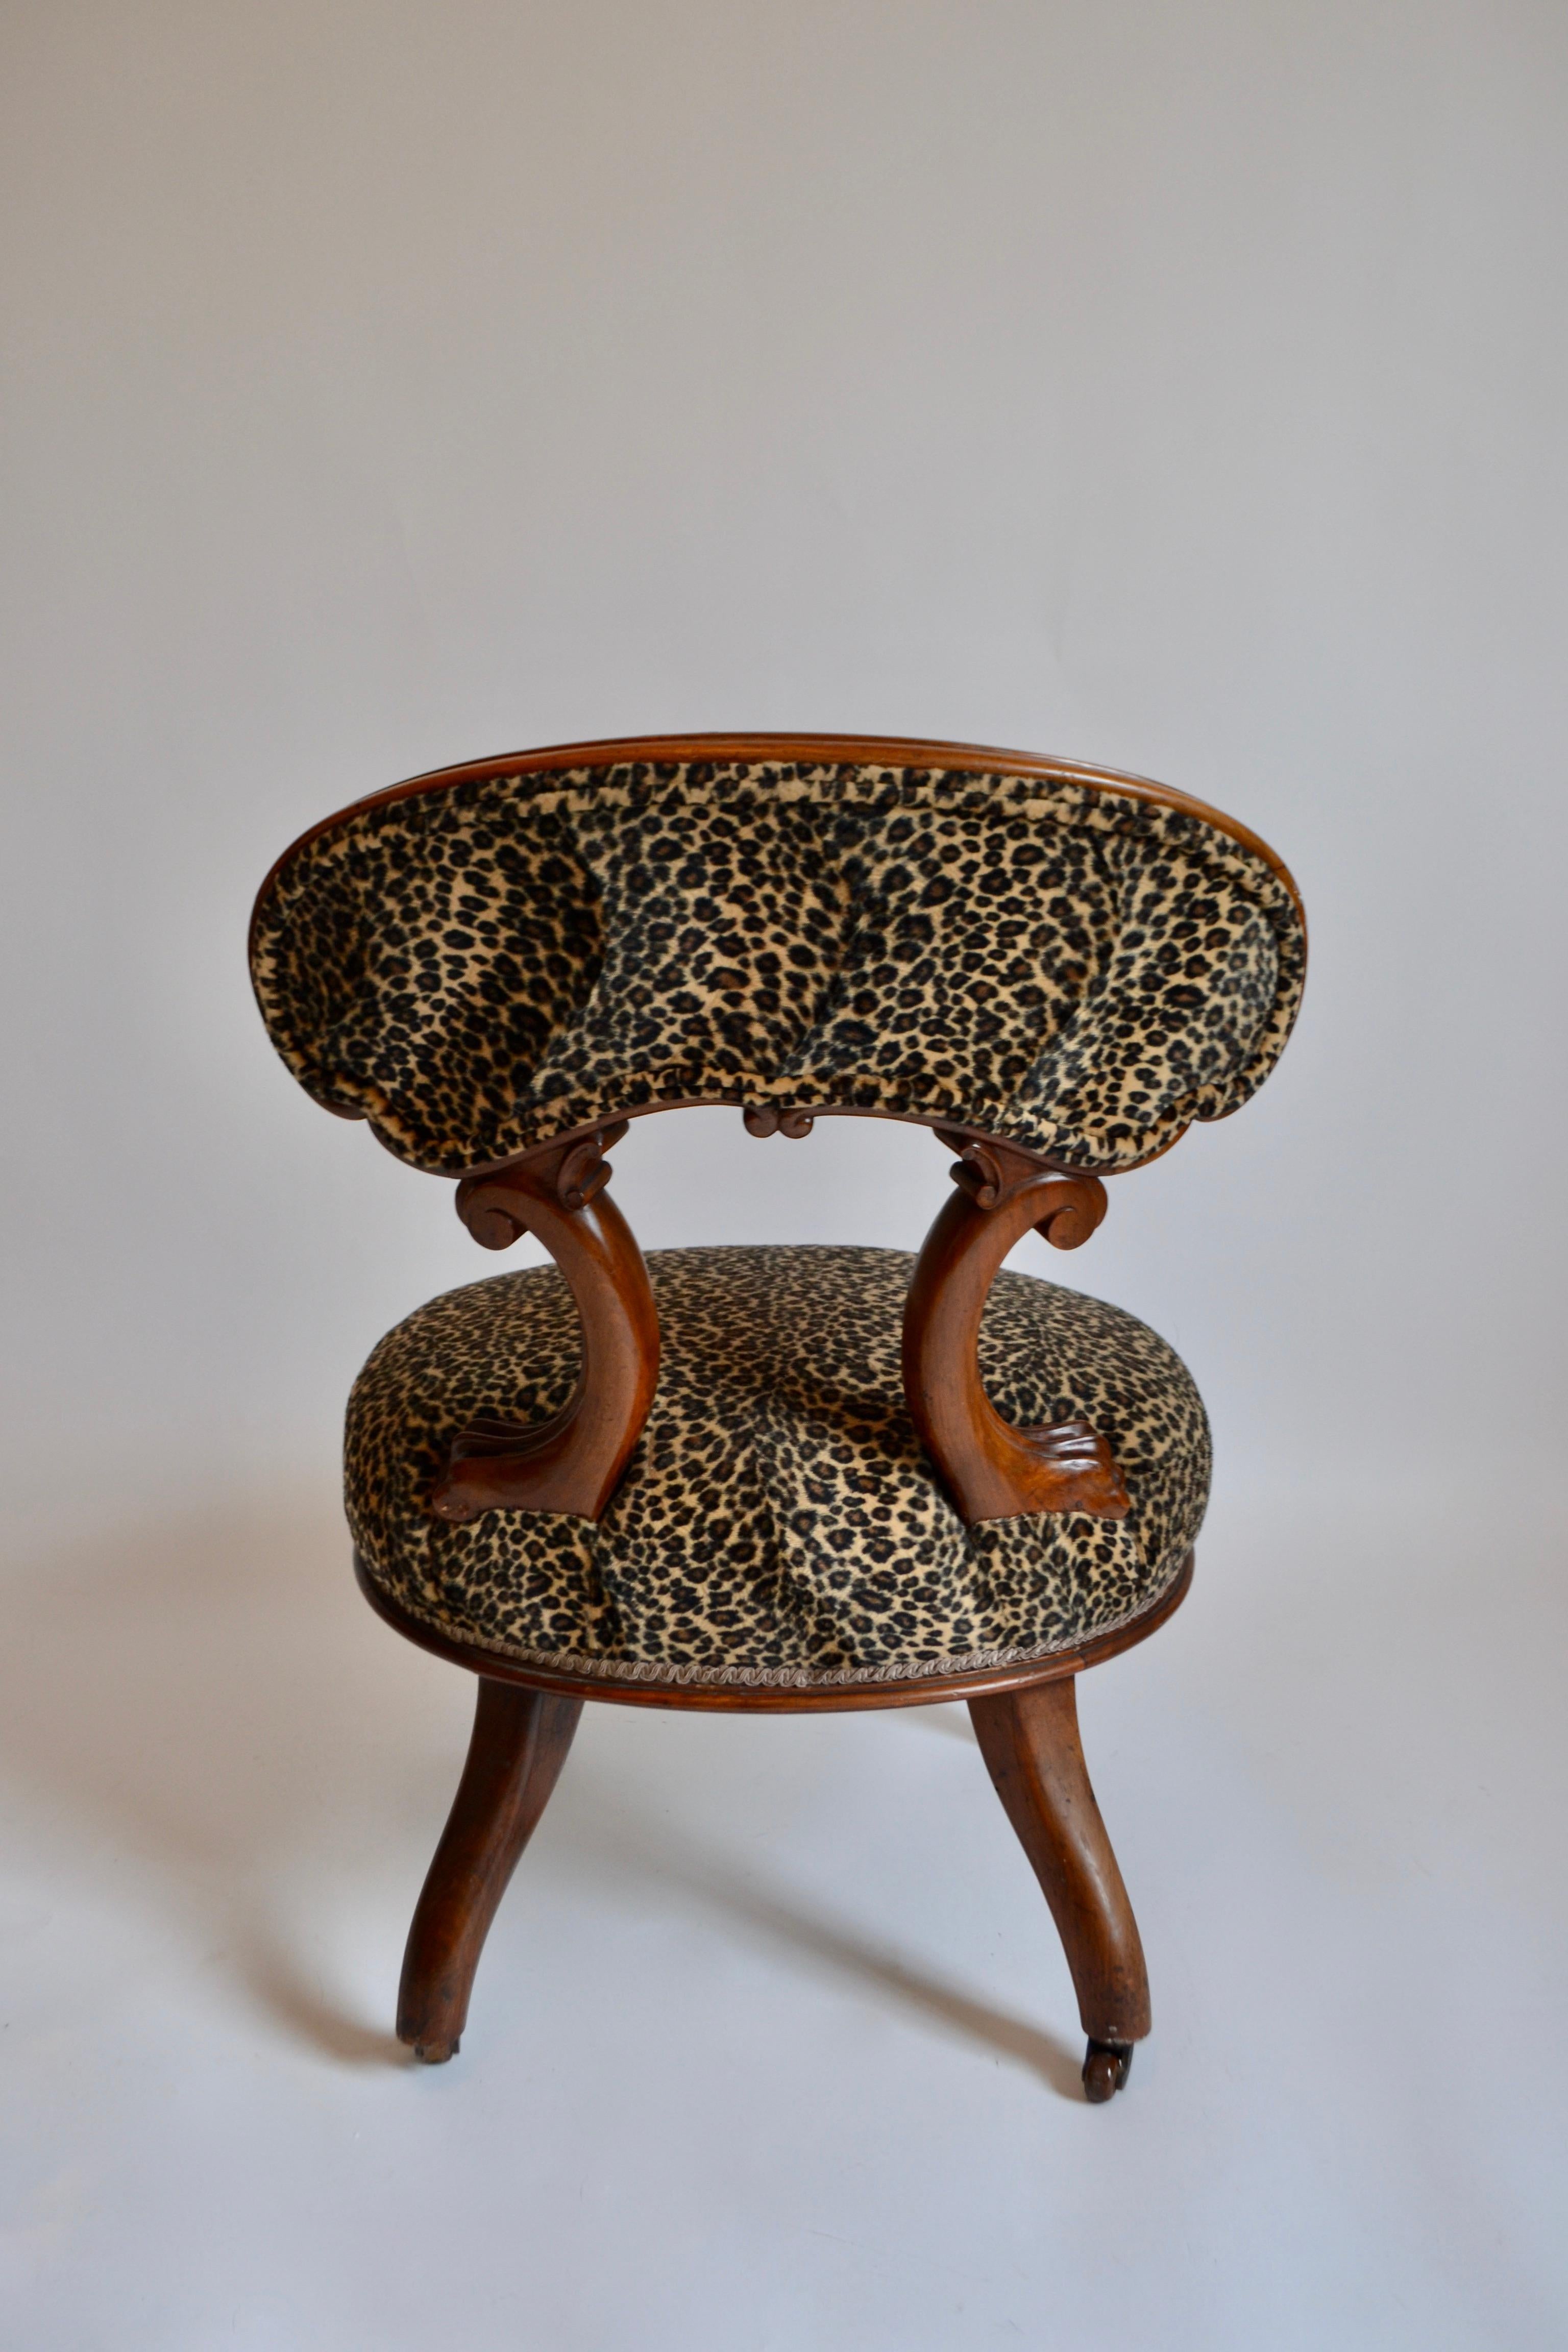 Pair of Victorian Walnut Chairs Upholstered in Faux Leopard Skin, 19th Century For Sale 2